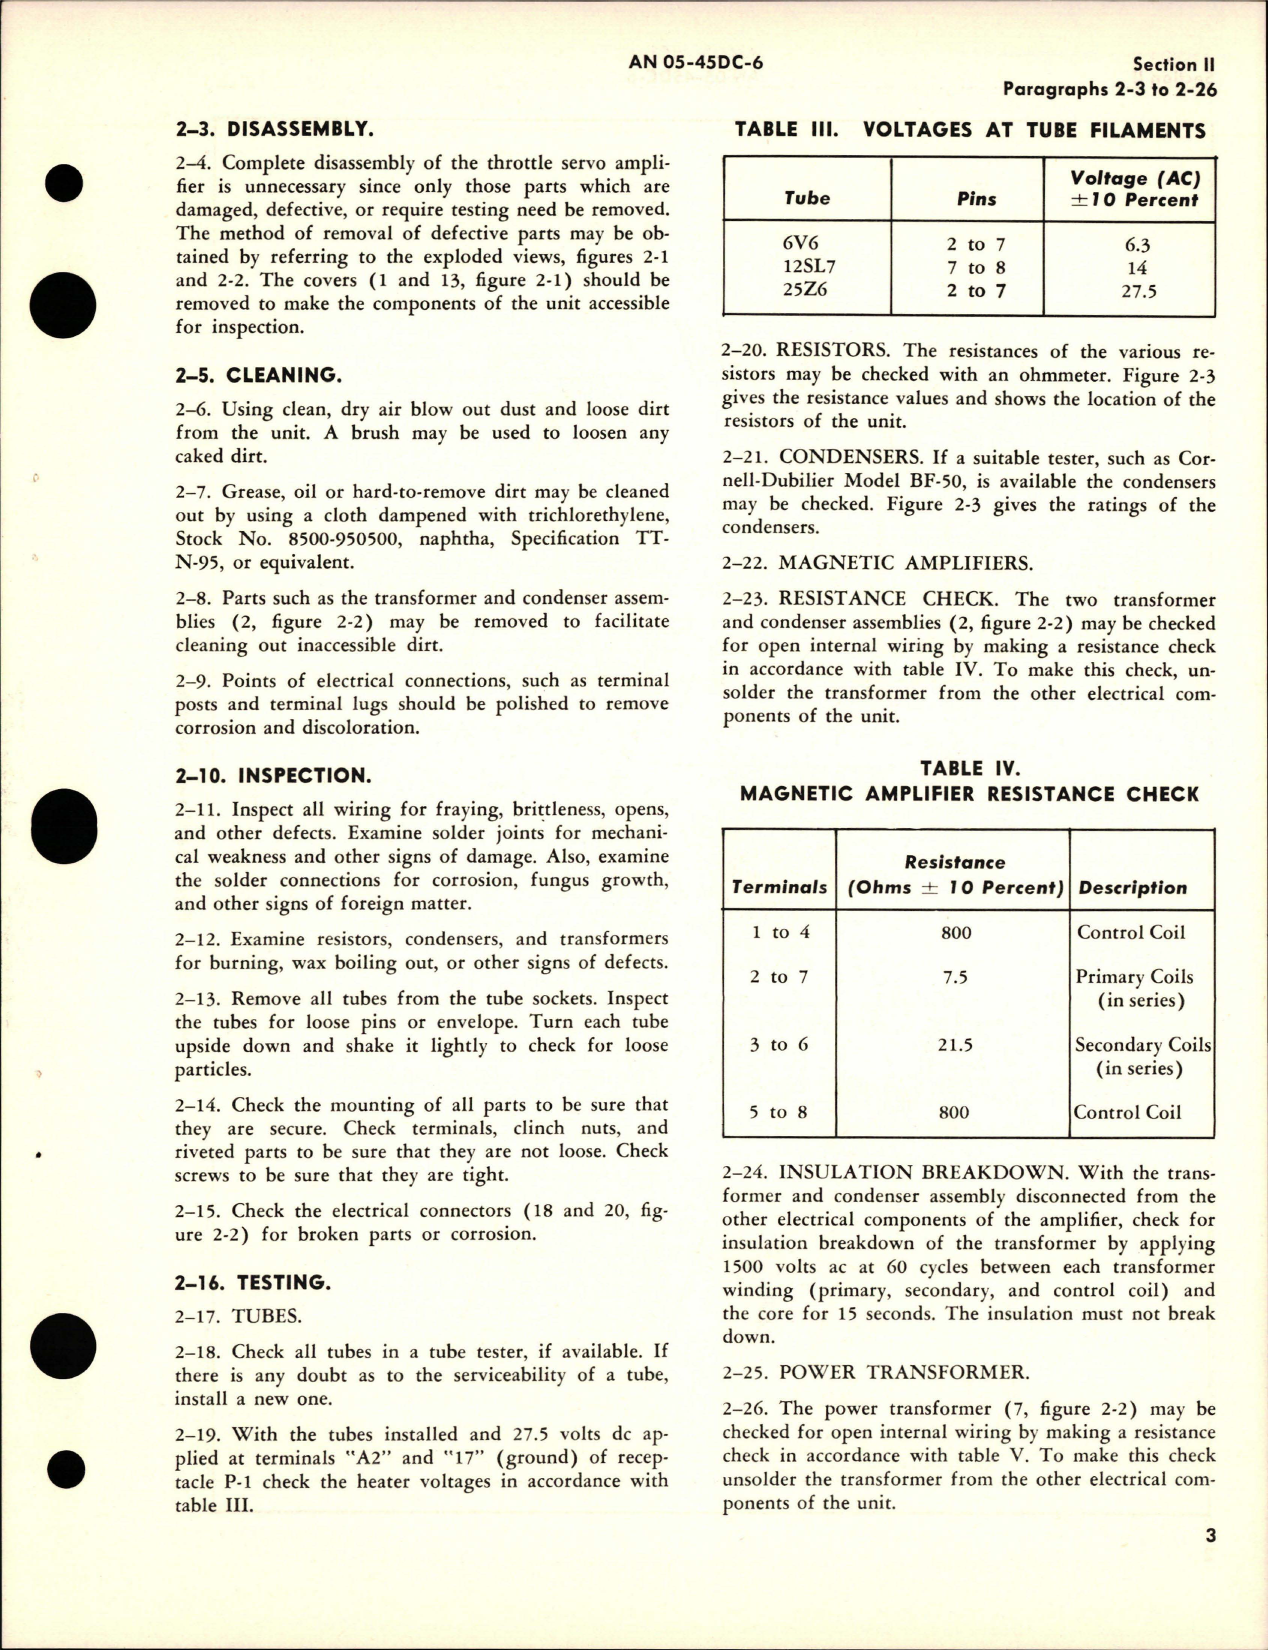 Sample page 7 from AirCorps Library document: Overhaul Instructions for Throttle Servo Amplifier - Part 15403-2-A